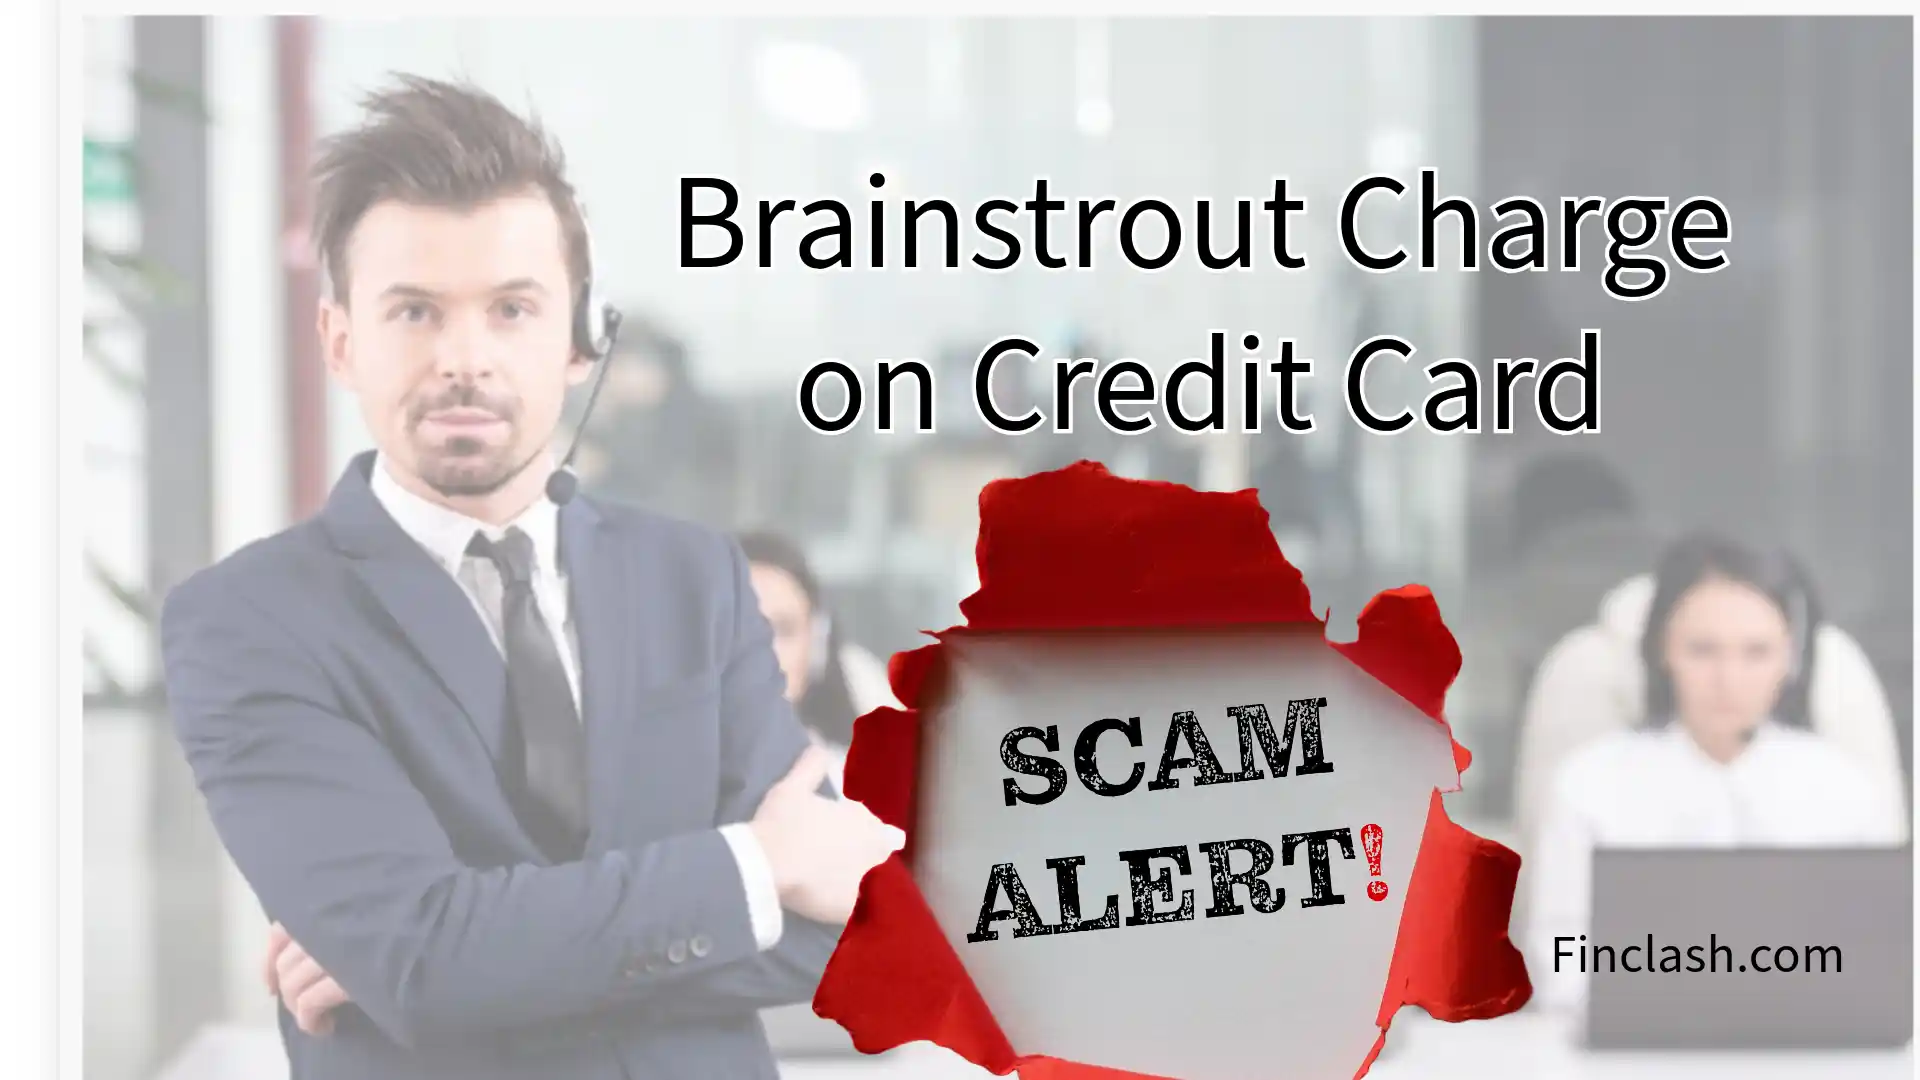 Brainstrout Charge on Credit Card